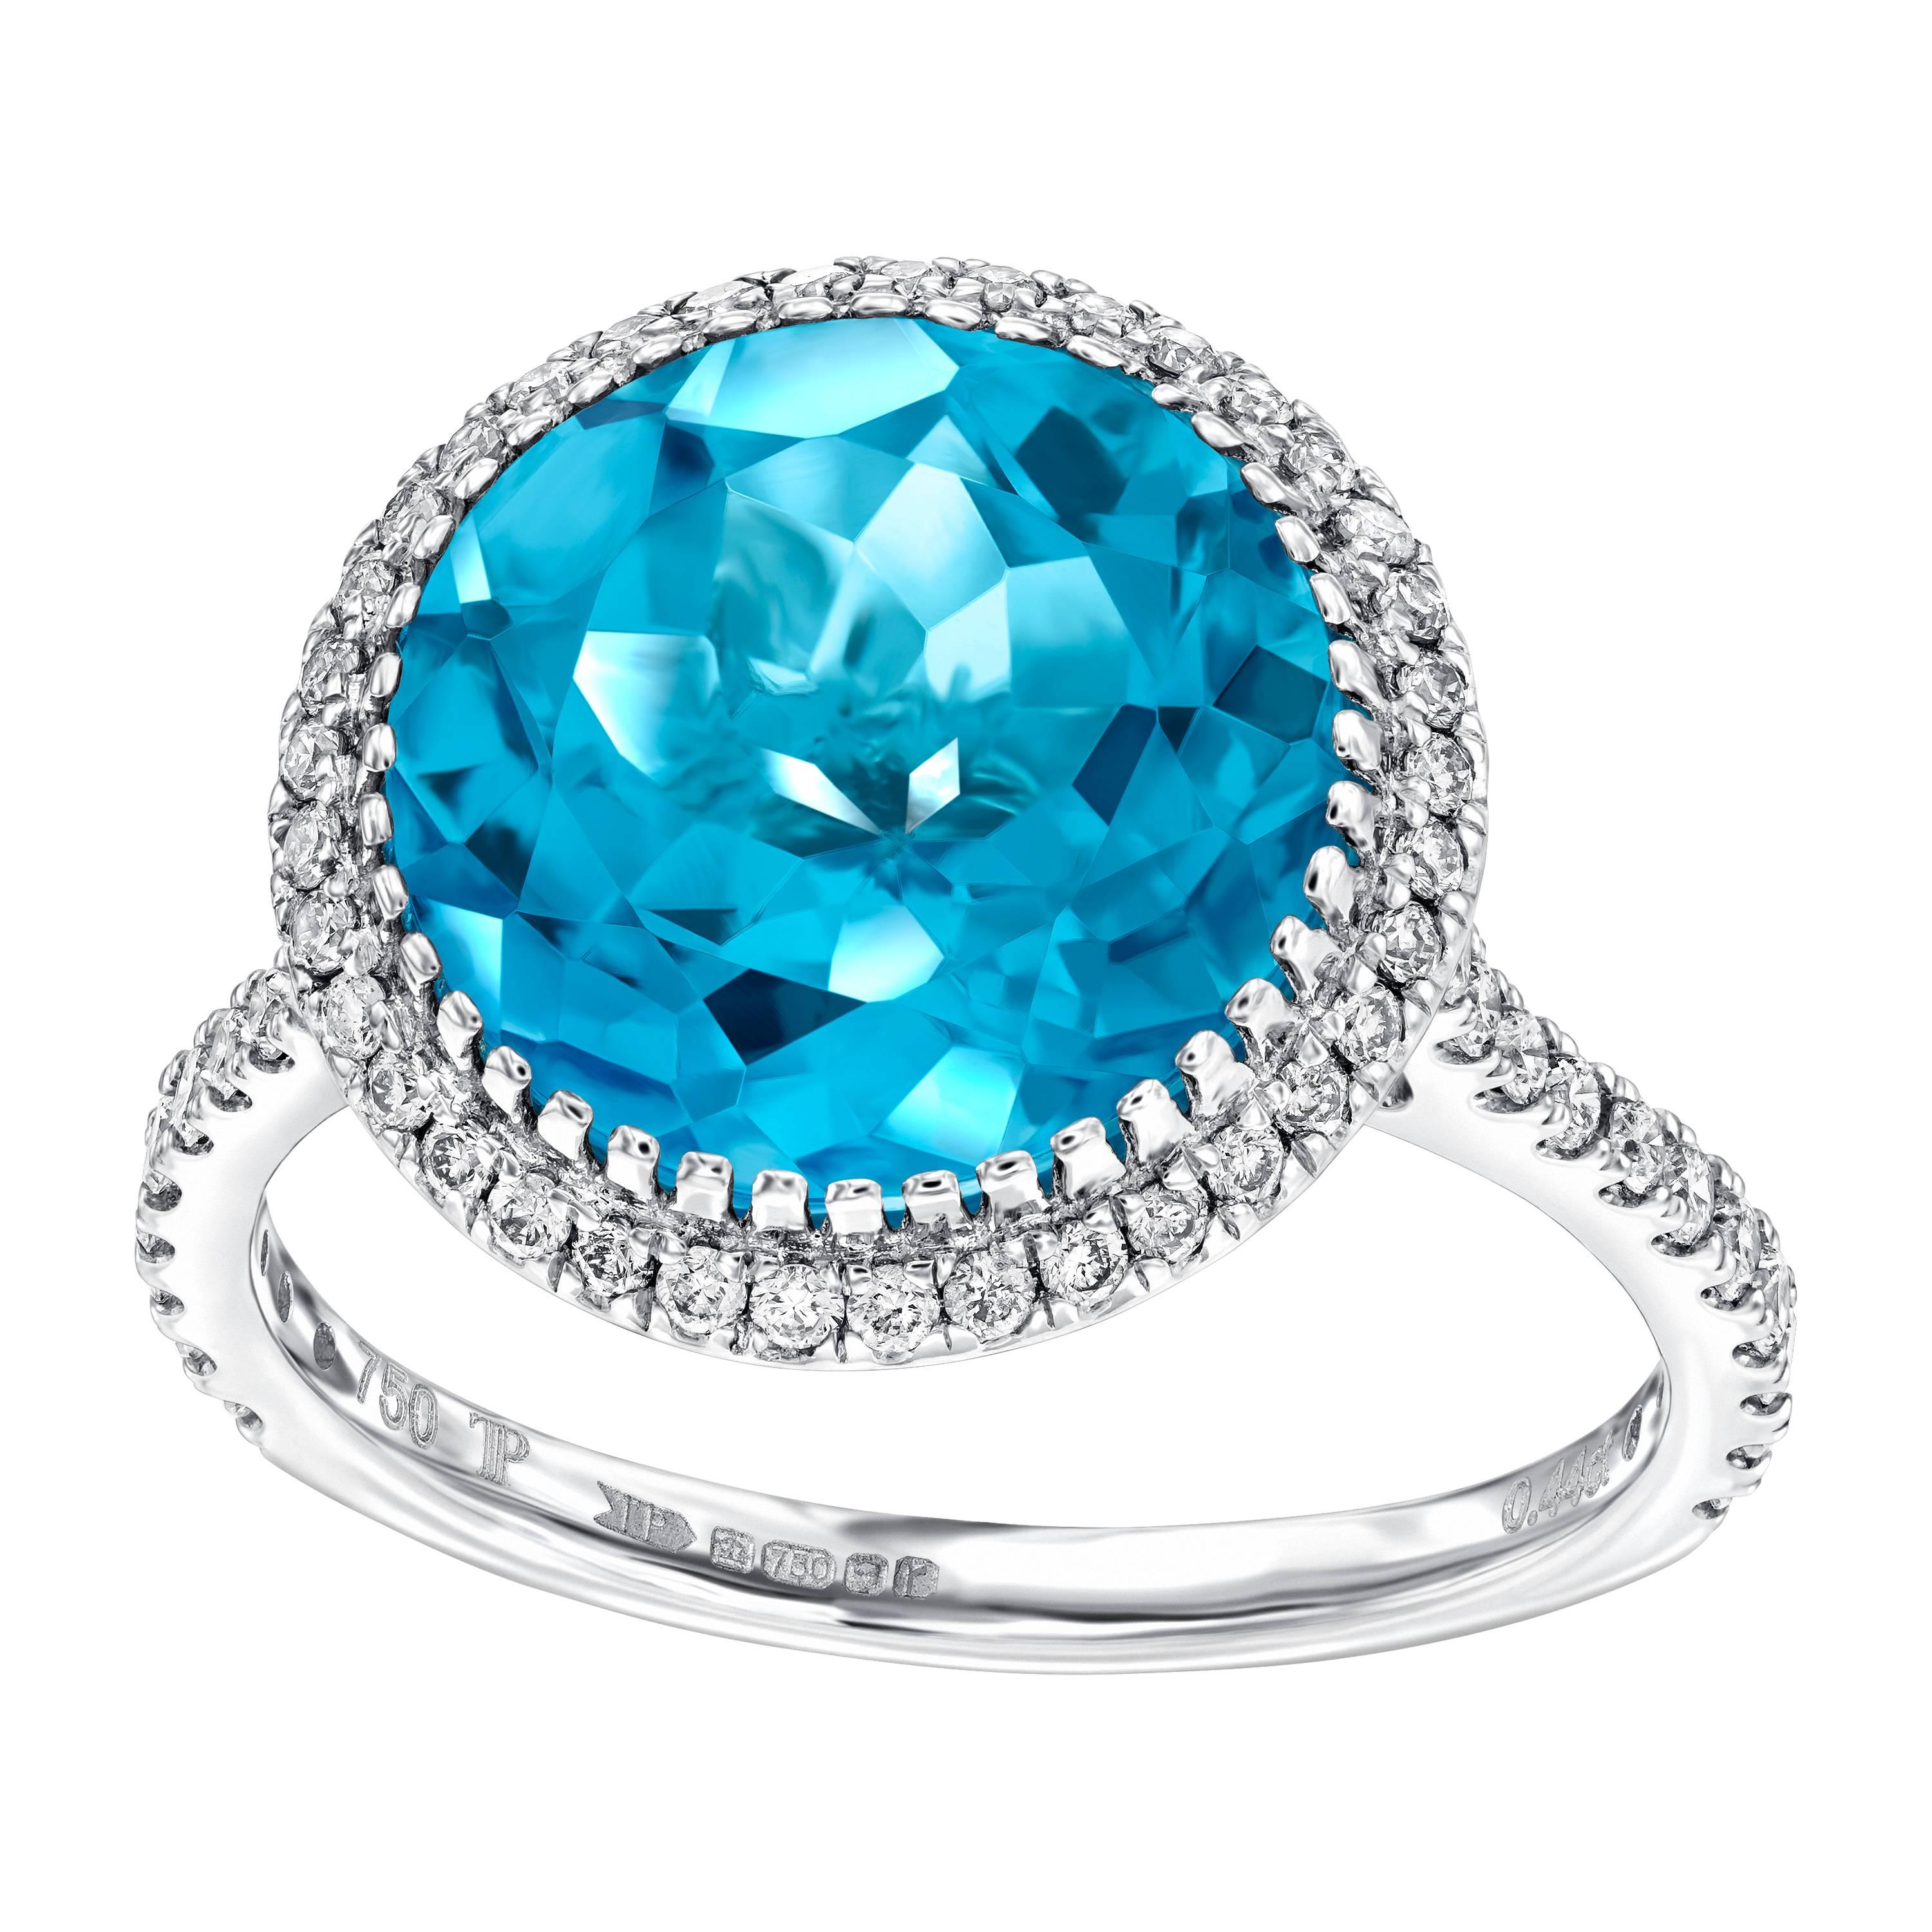 This beautiful 3.75ct Round Cut Blue Topaz Engagement Ring surrounded by 0.38 Carats in a pave setting, featuring a halo of Round Brilliant Diamonds  enhancing its extreme sparkle. Set in 18ct white gold this ring has a total weight of 4.13ct. With